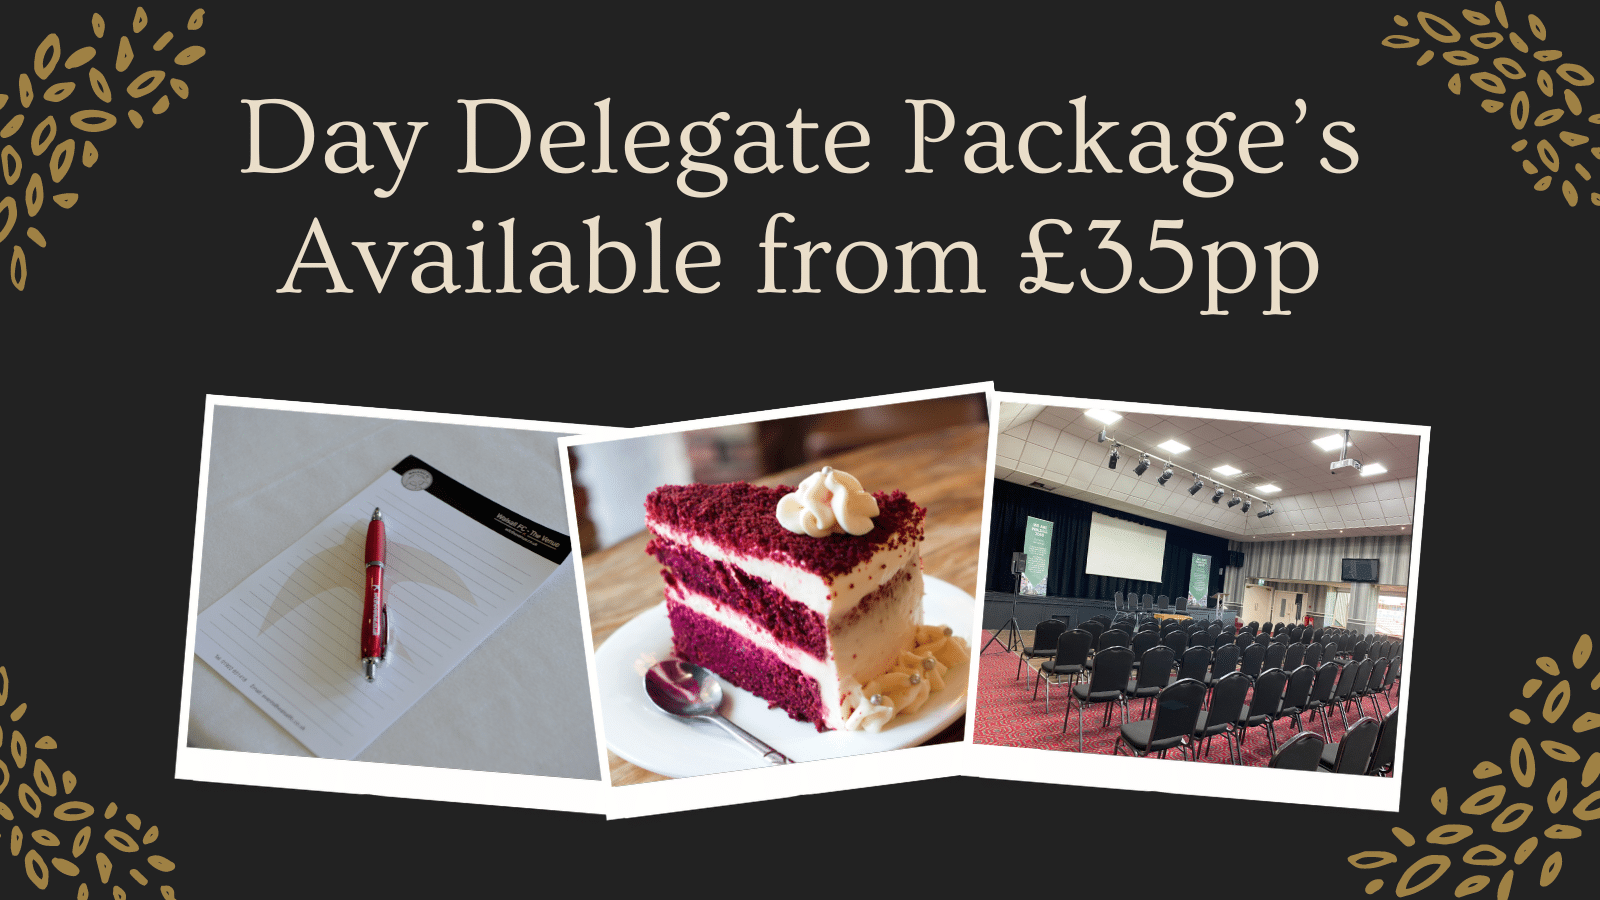 Day Delegate Package’s Available from £35